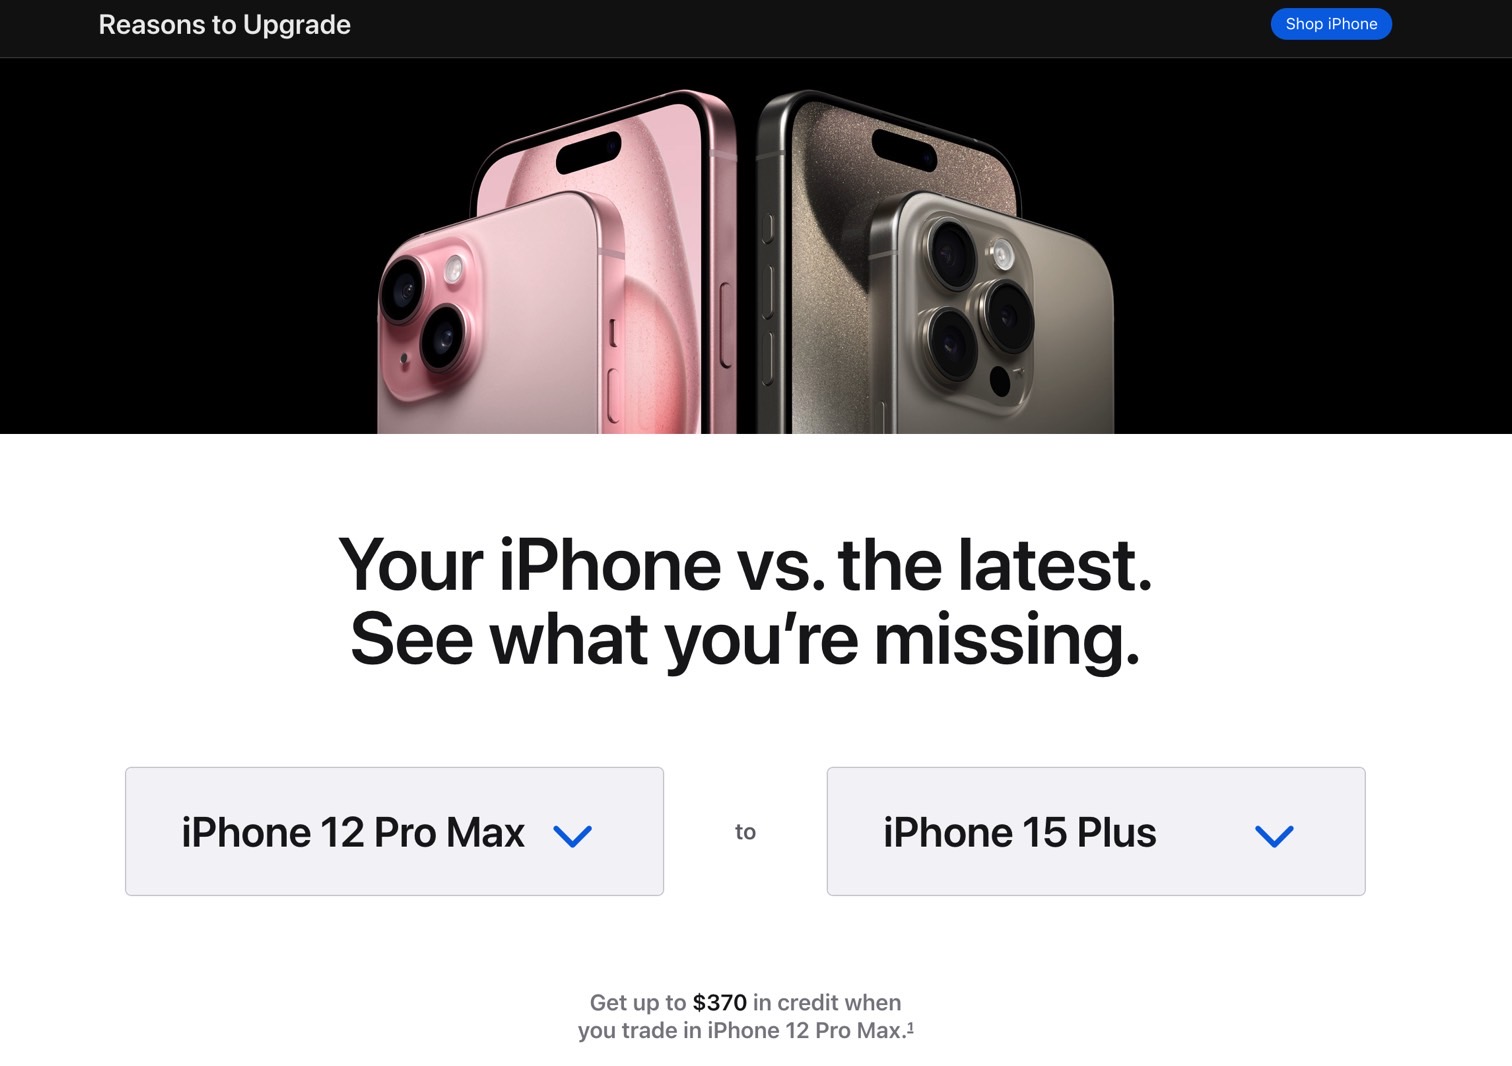 Apple’s new iPhone comparison tool gives you all the reasons to upgrade